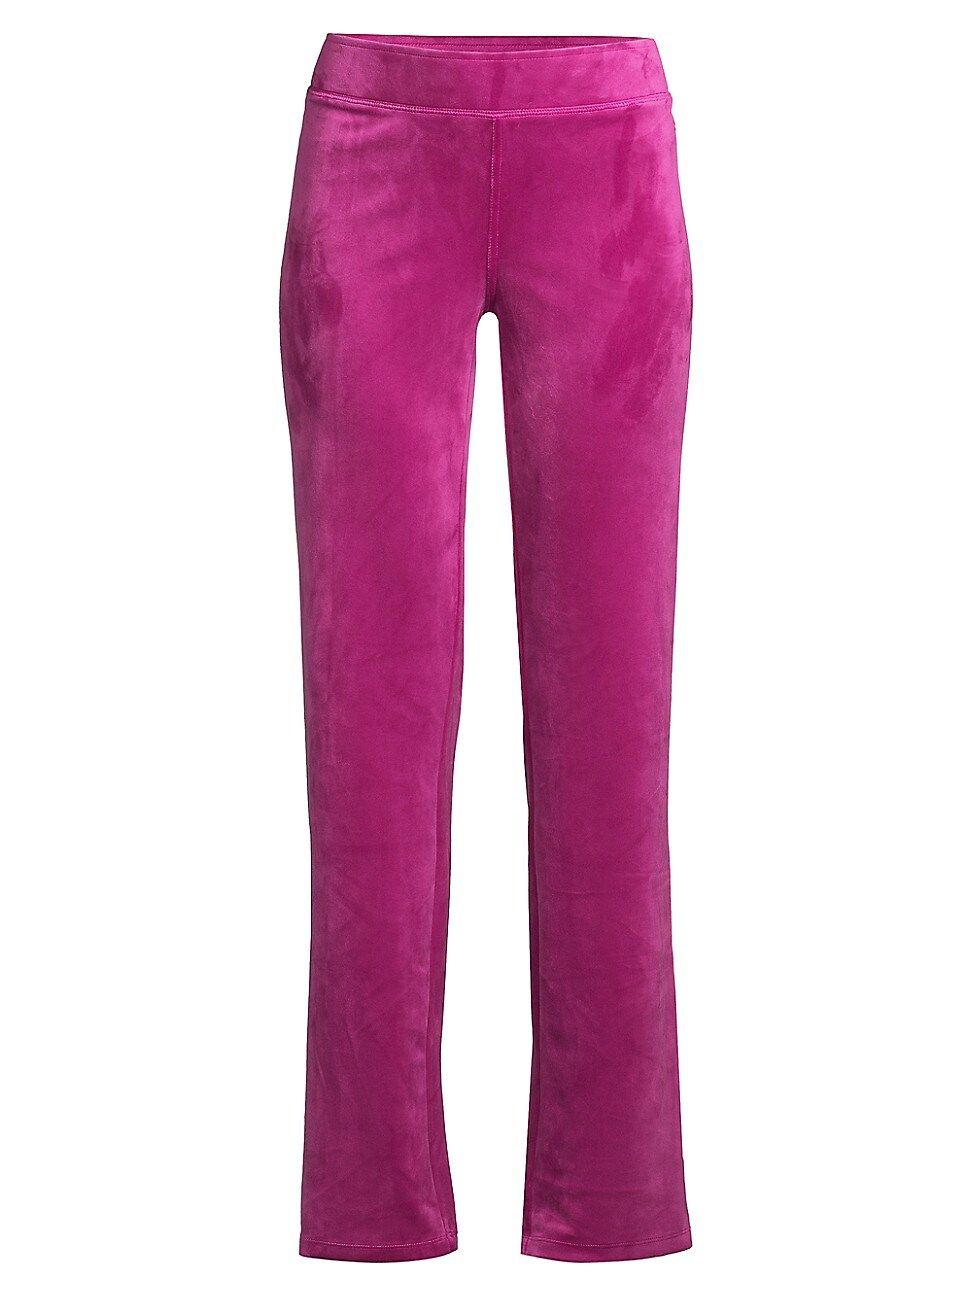 Lilly Pulitzer Women's Dorsey Velour Pants - Bordeaux Berry - Size Small | Saks Fifth Avenue